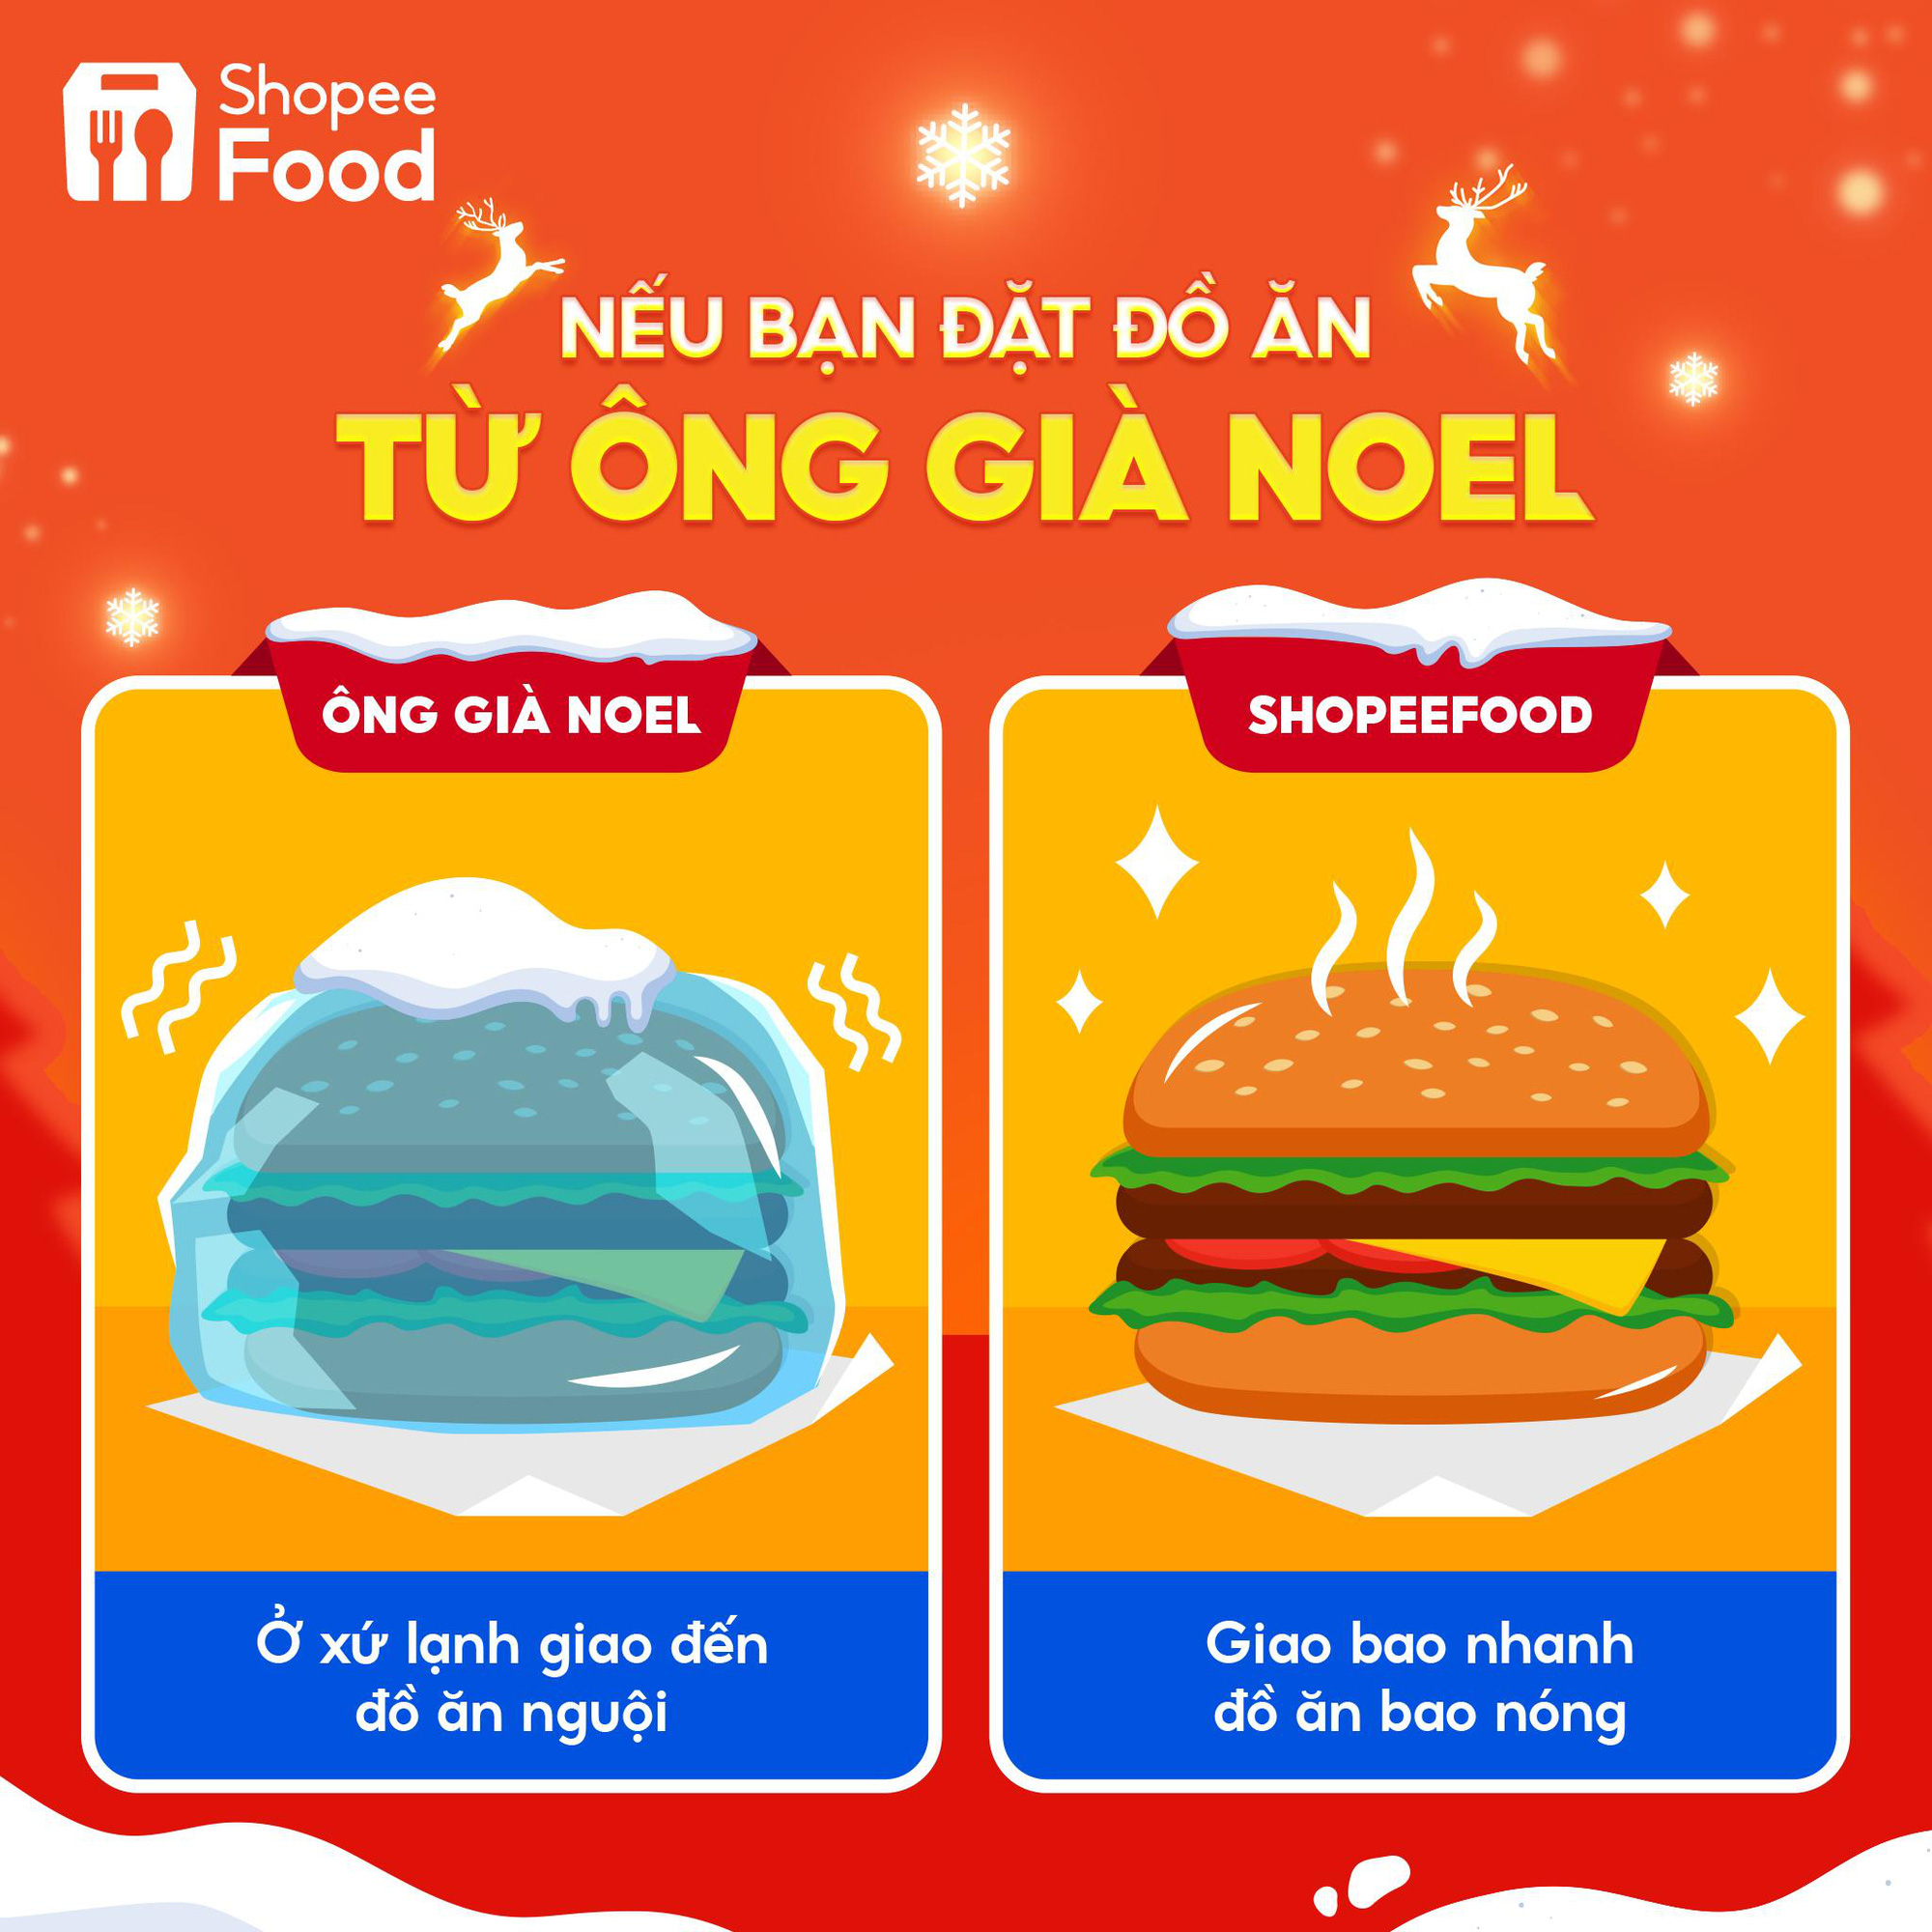 4 special things about Santa Claus ShopeeFood, did you know?  - Photo 2.